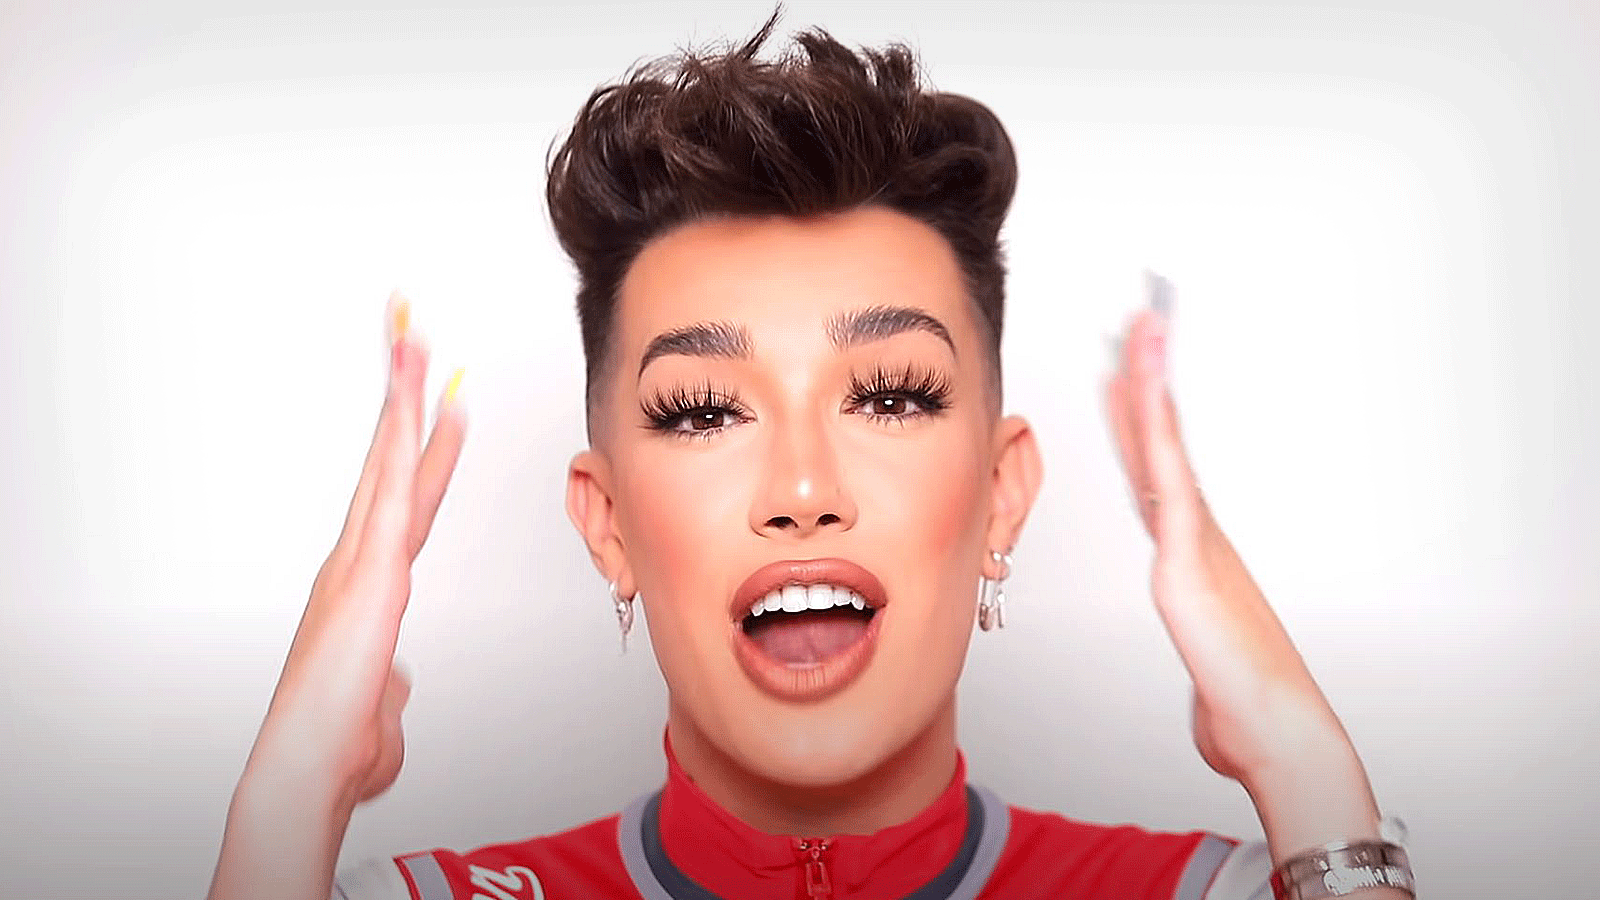 James Charles speaks out after Tati Westbrook exposes Jeffree Star